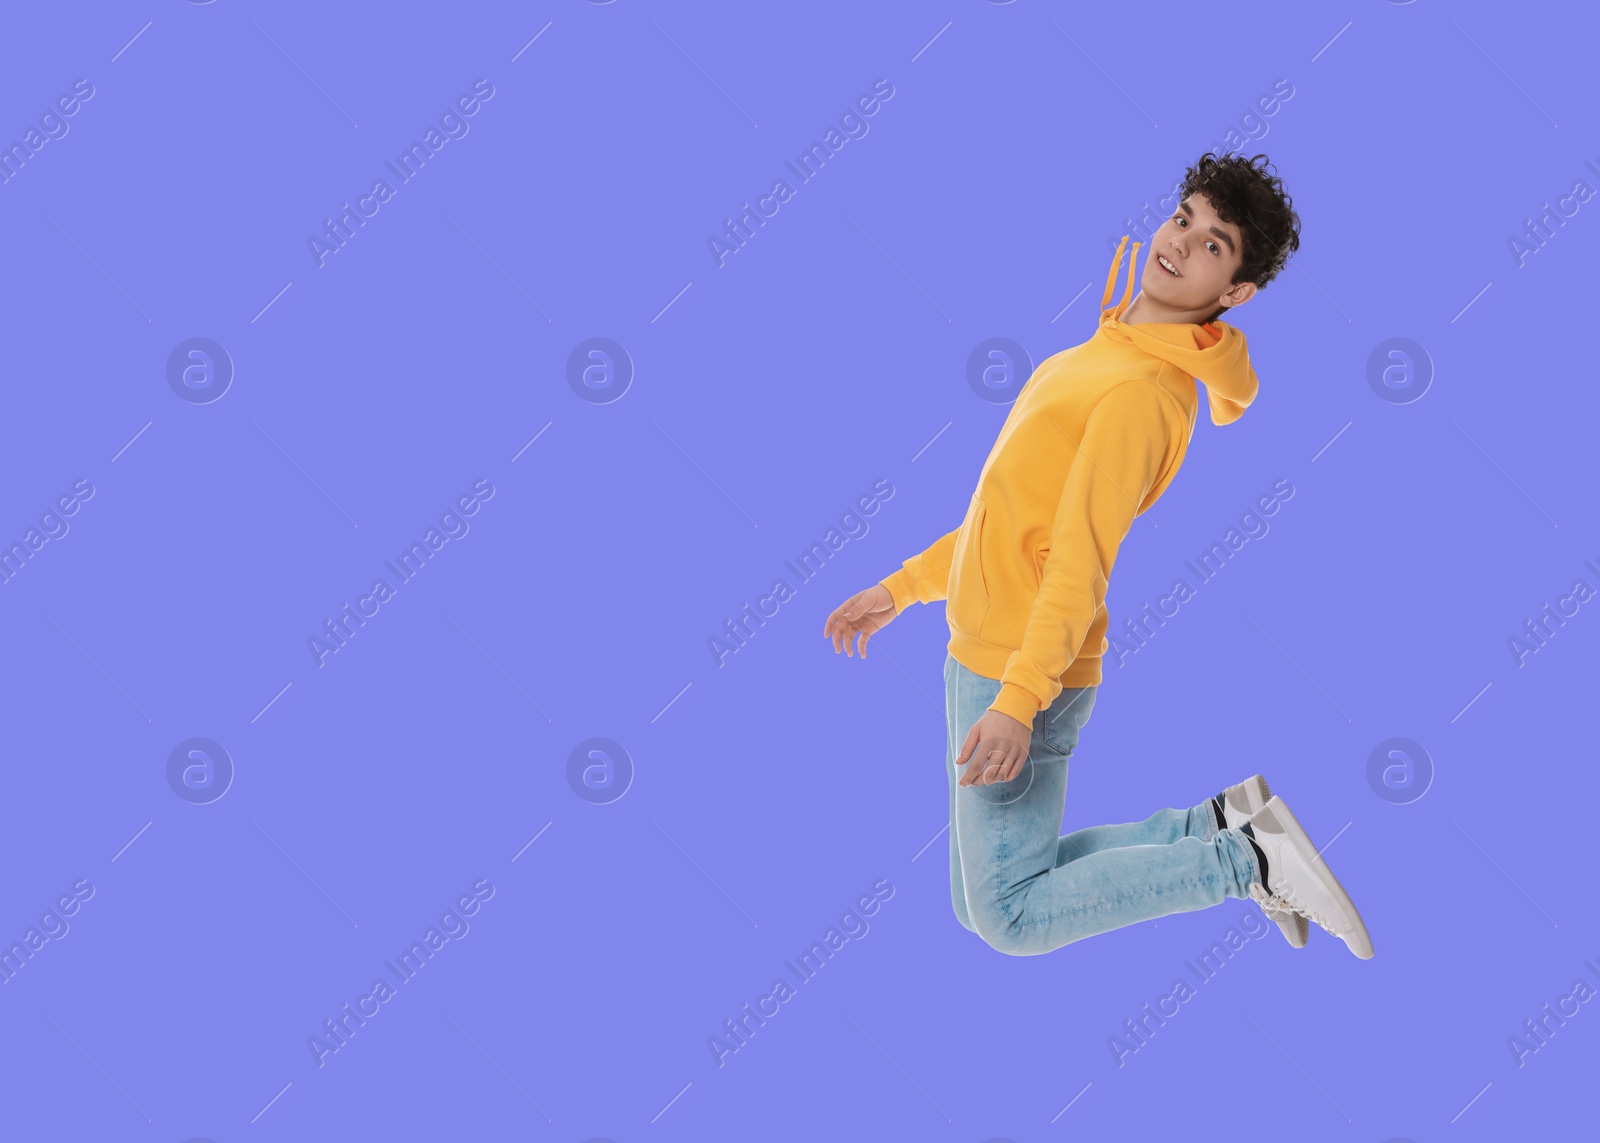 Image of Teenage boy jumping on light blue background, space for text